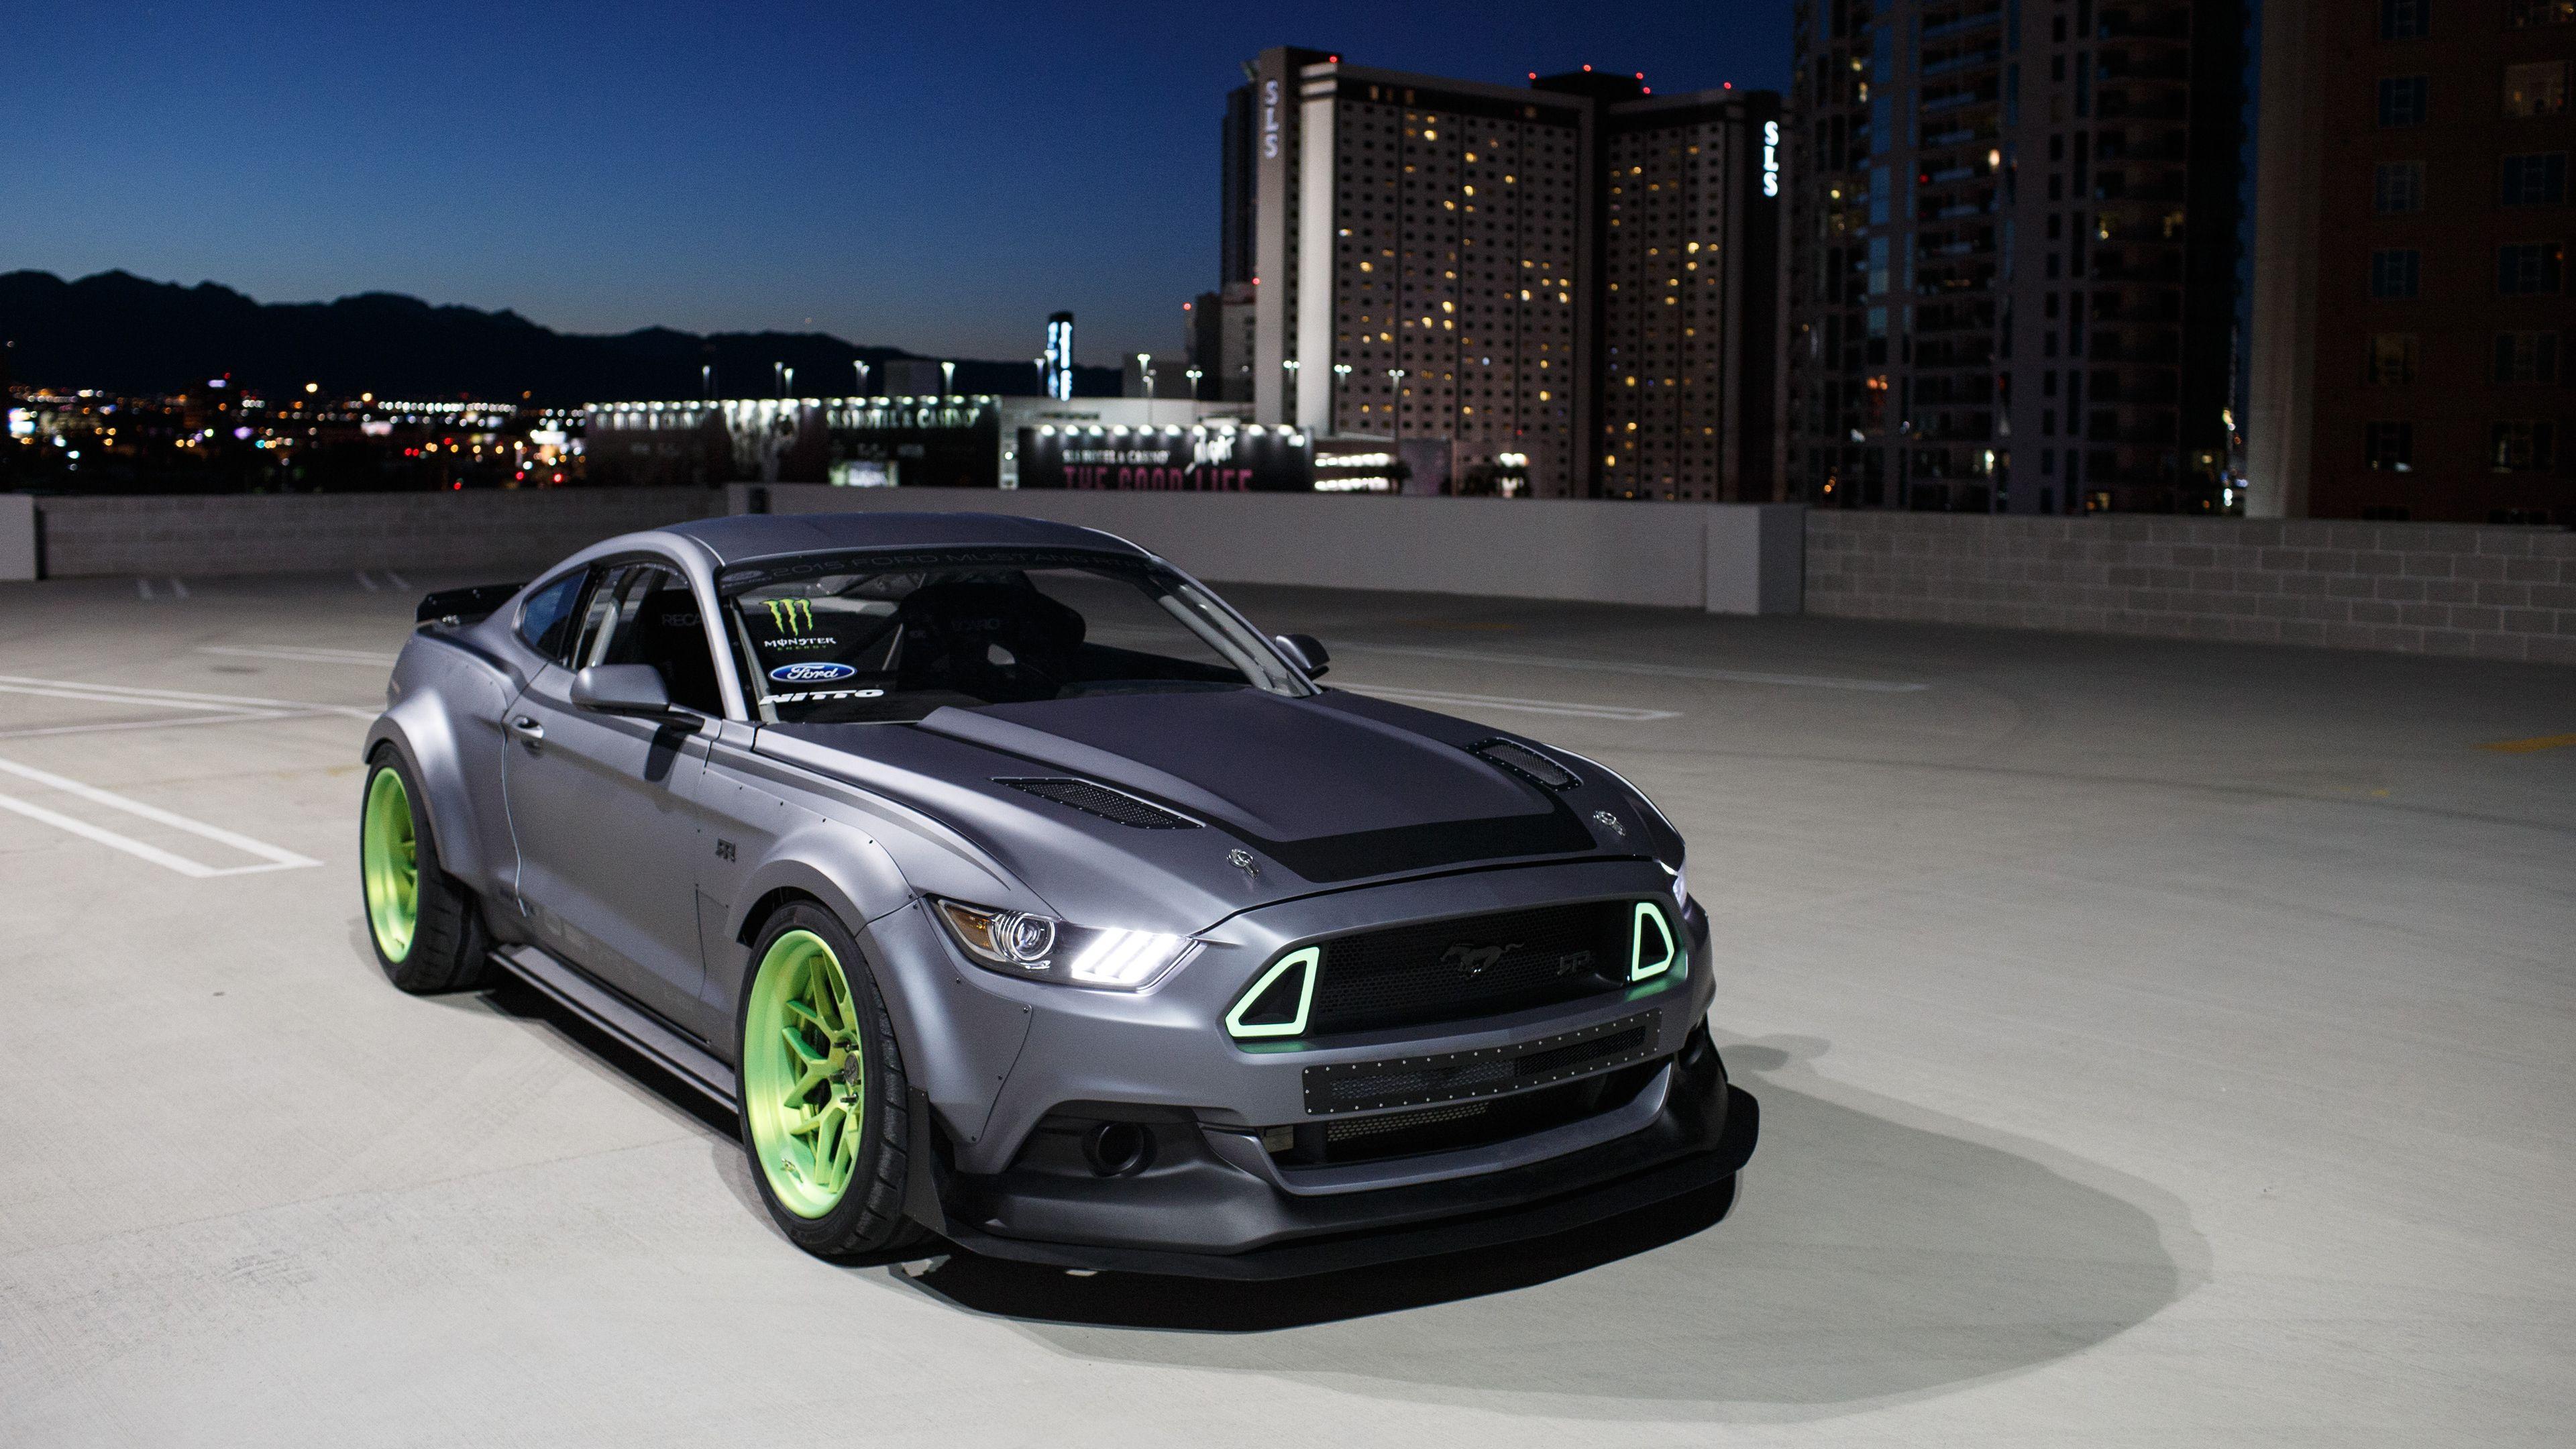 Rtr Mustang Wallpapers Top Free Rtr Mustang Backgrounds Wallpaperaccess